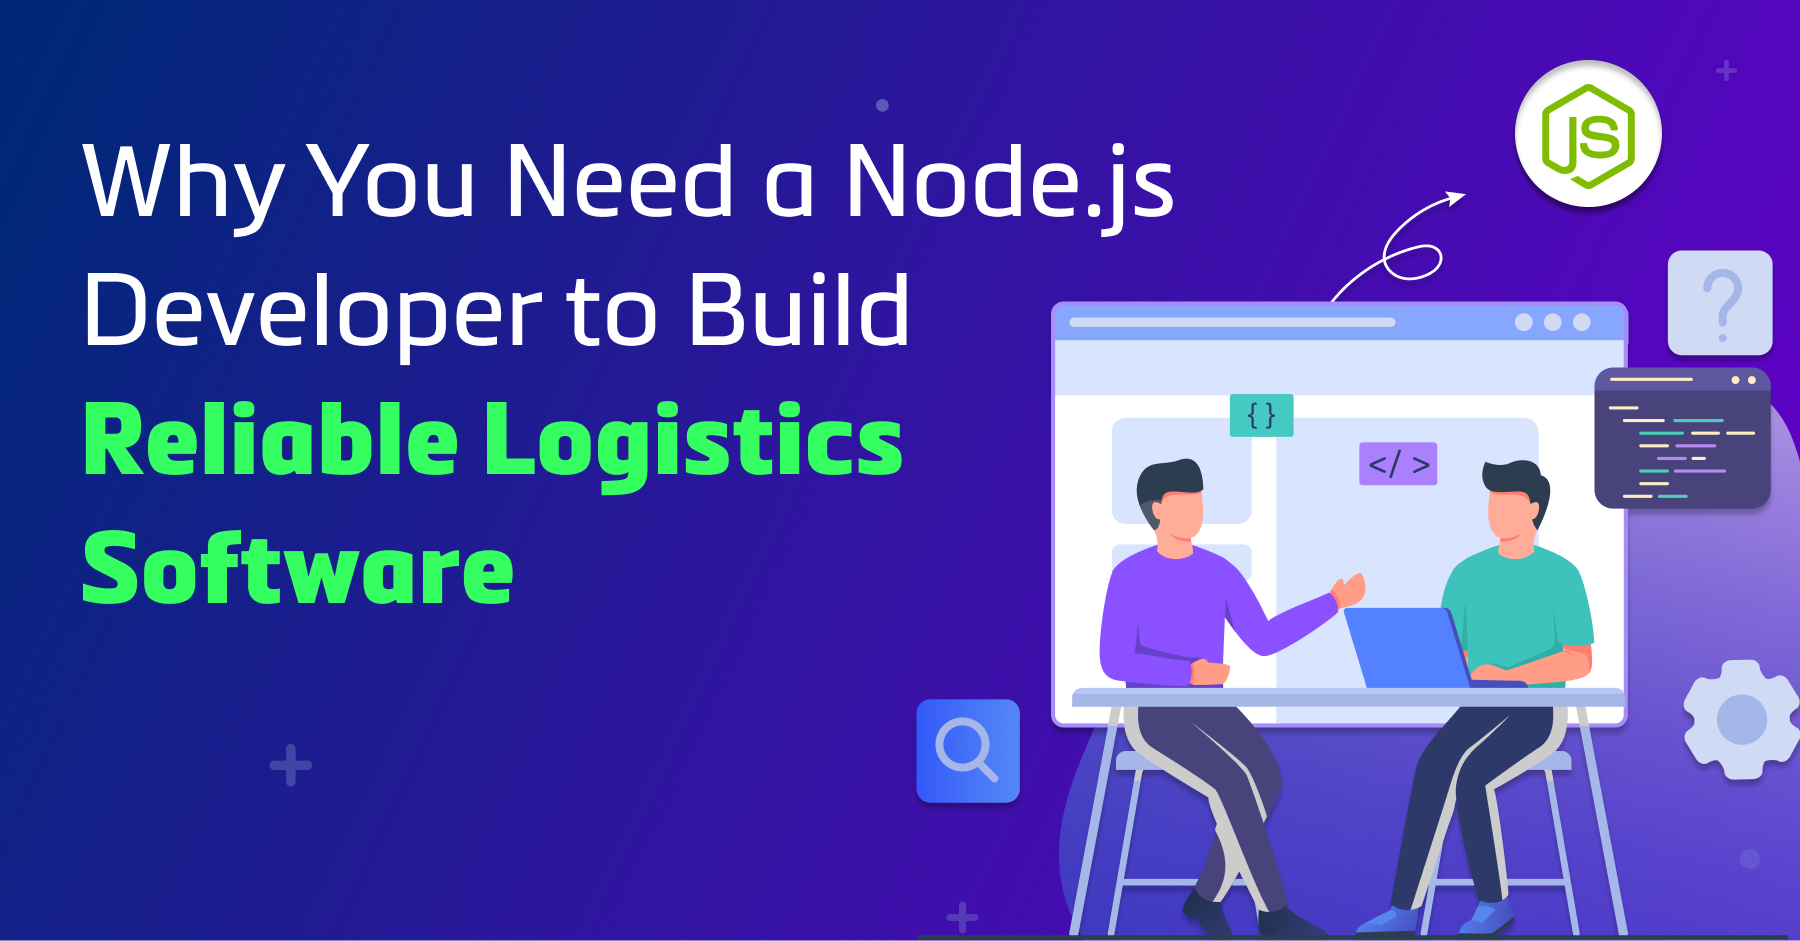 Why You Need a Node.js Developer to Build Logistics Software Banner